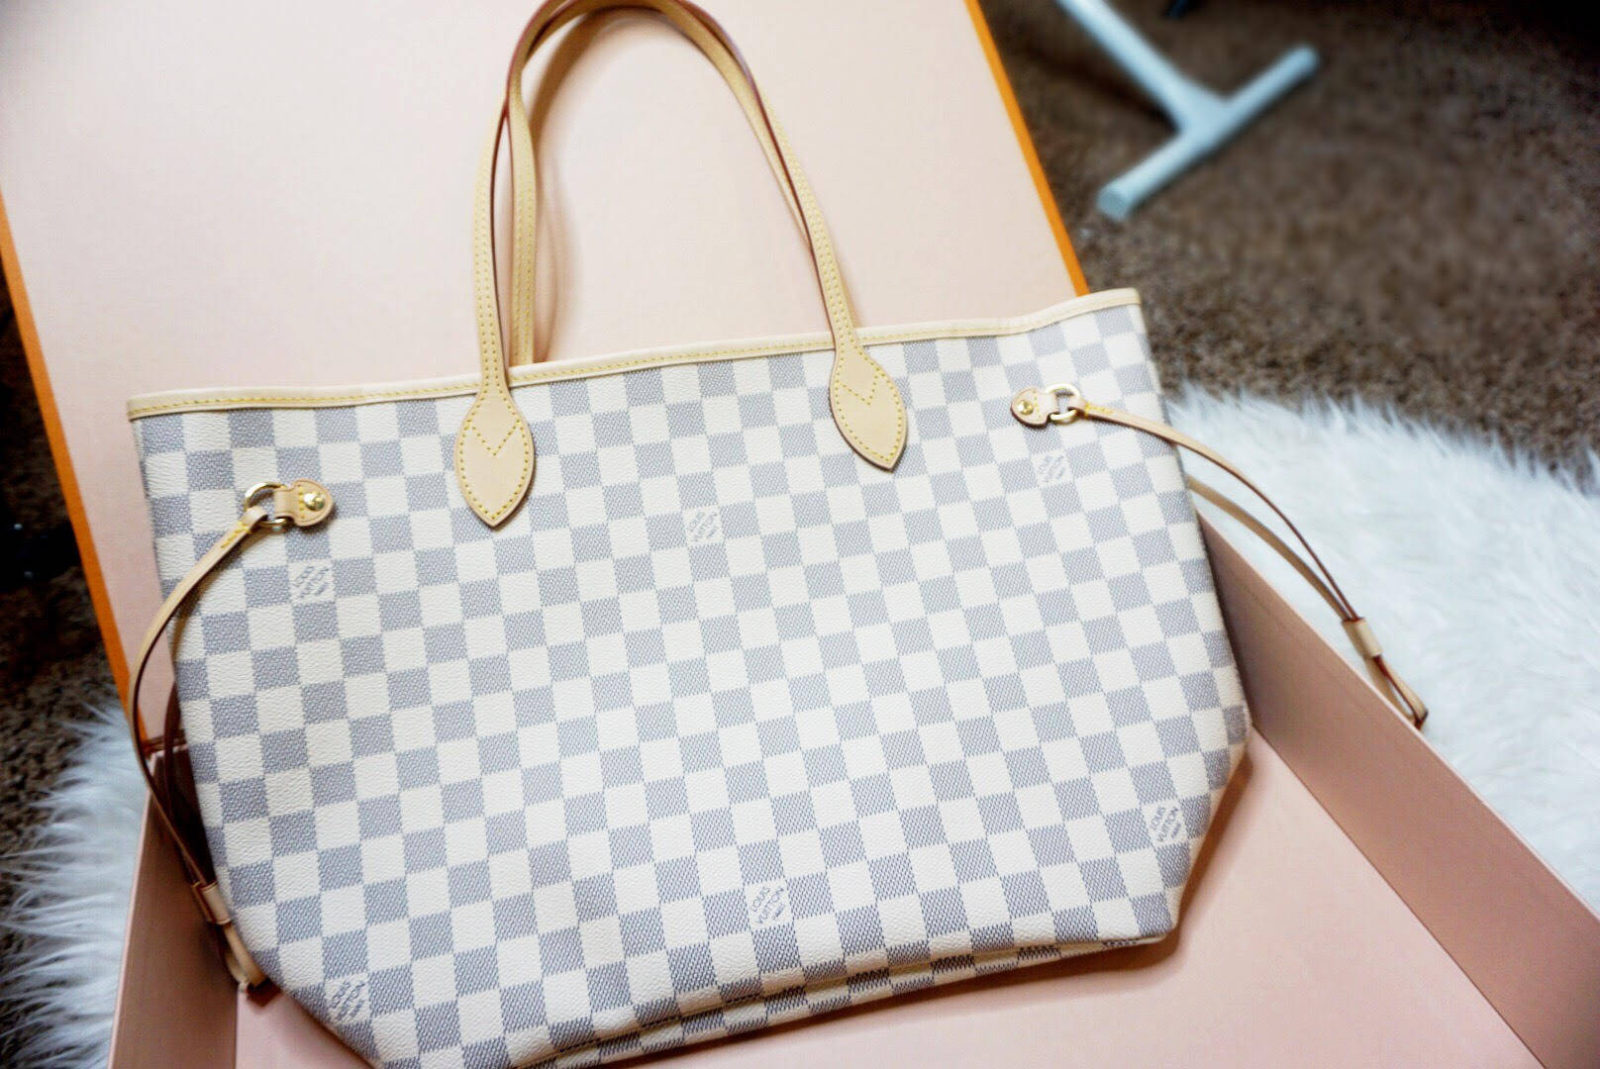 Louis Vuitton Damier Neverfull Mm Review | Jaguar Clubs of North America